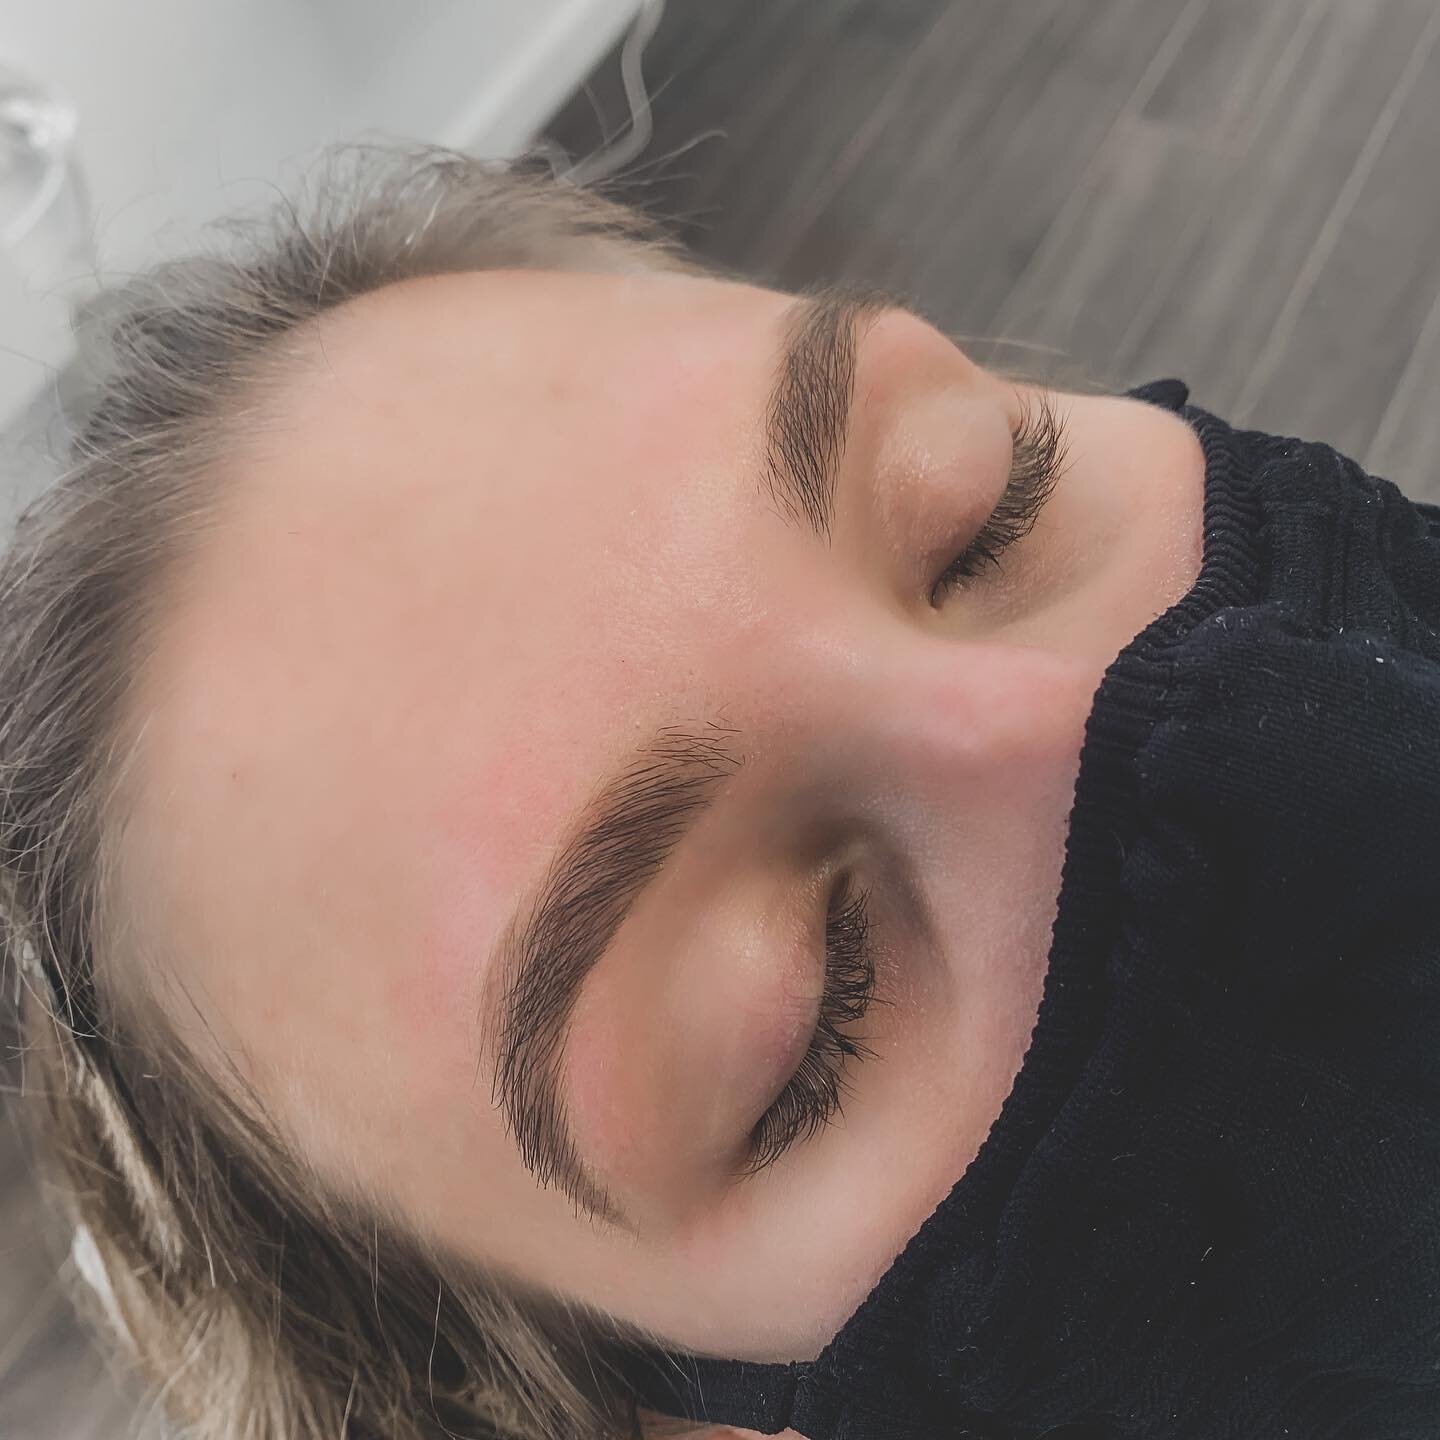 𝔹𝕣𝕠𝕨 𝕤𝕙𝕒𝕡𝕚𝕟𝕘 &amp; 𝕥𝕚𝕟𝕥𝕚𝕟𝕘
Book with me to get perfectly shaped brows
✨New clients receive $20 off first lash set|$10 off keratin|$5 off brow wax &amp; tint✨
.
.
Link in bio to book
Or you can contact me directly for appointments th